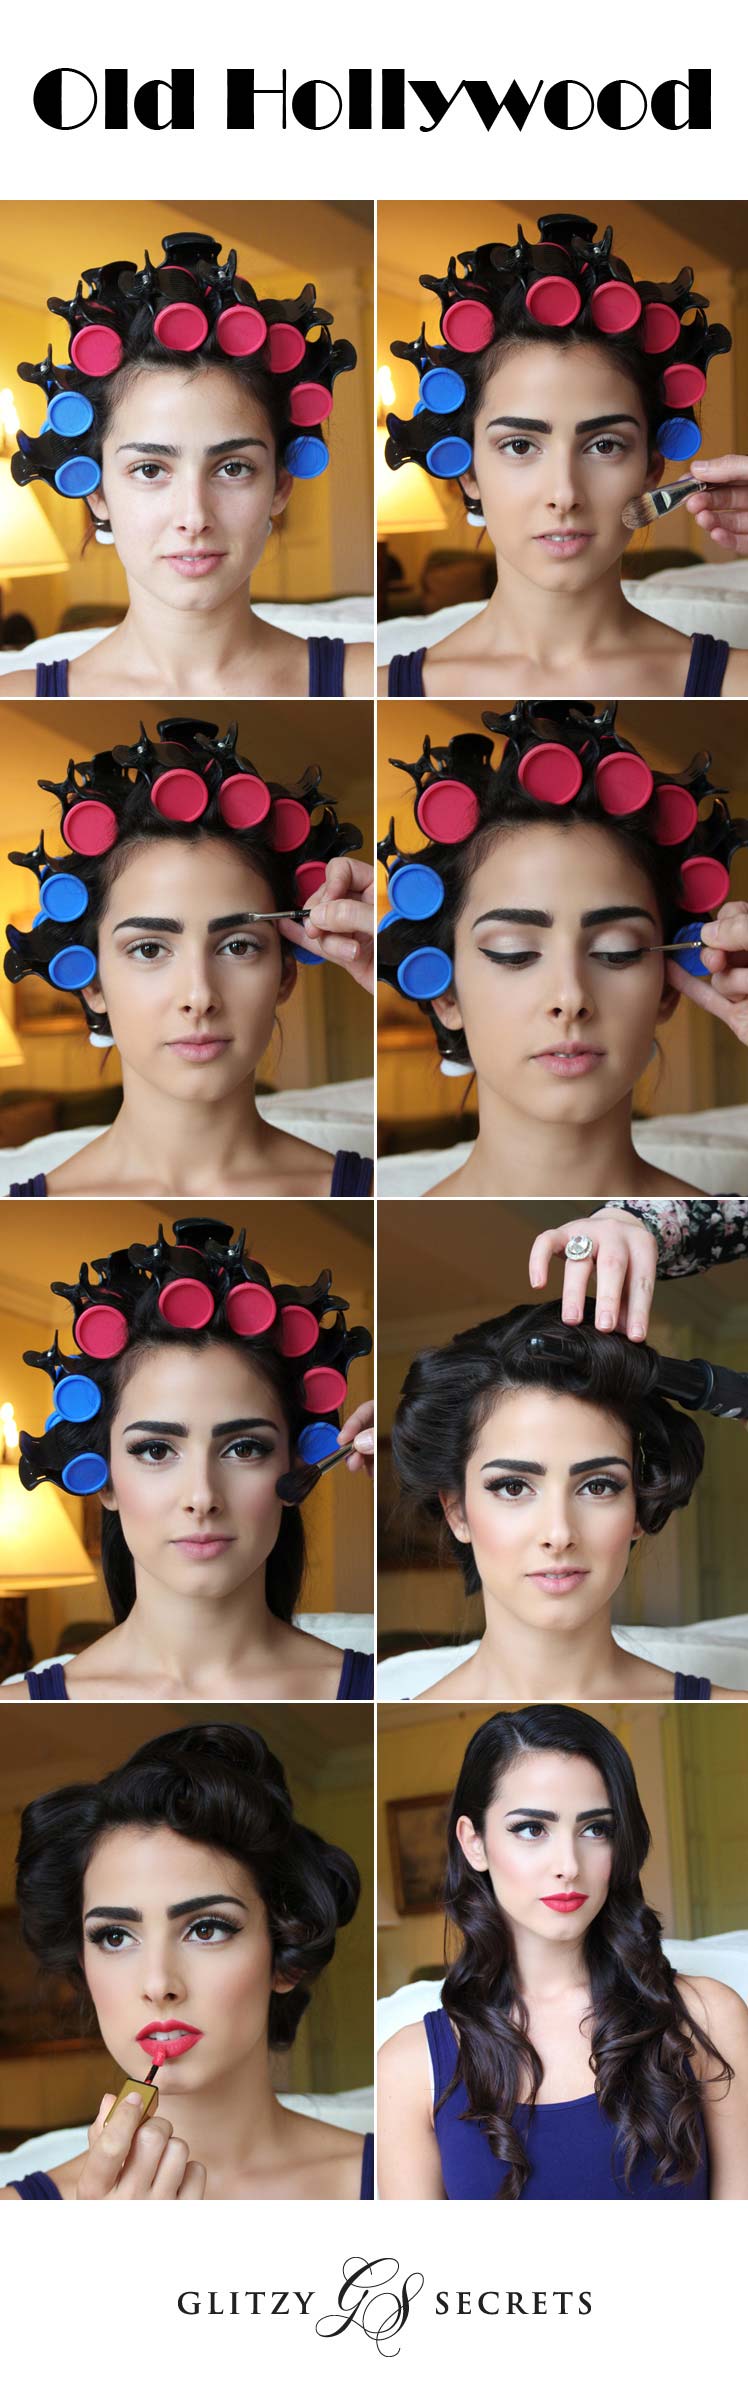 Hollywood style hair and make up tutorial